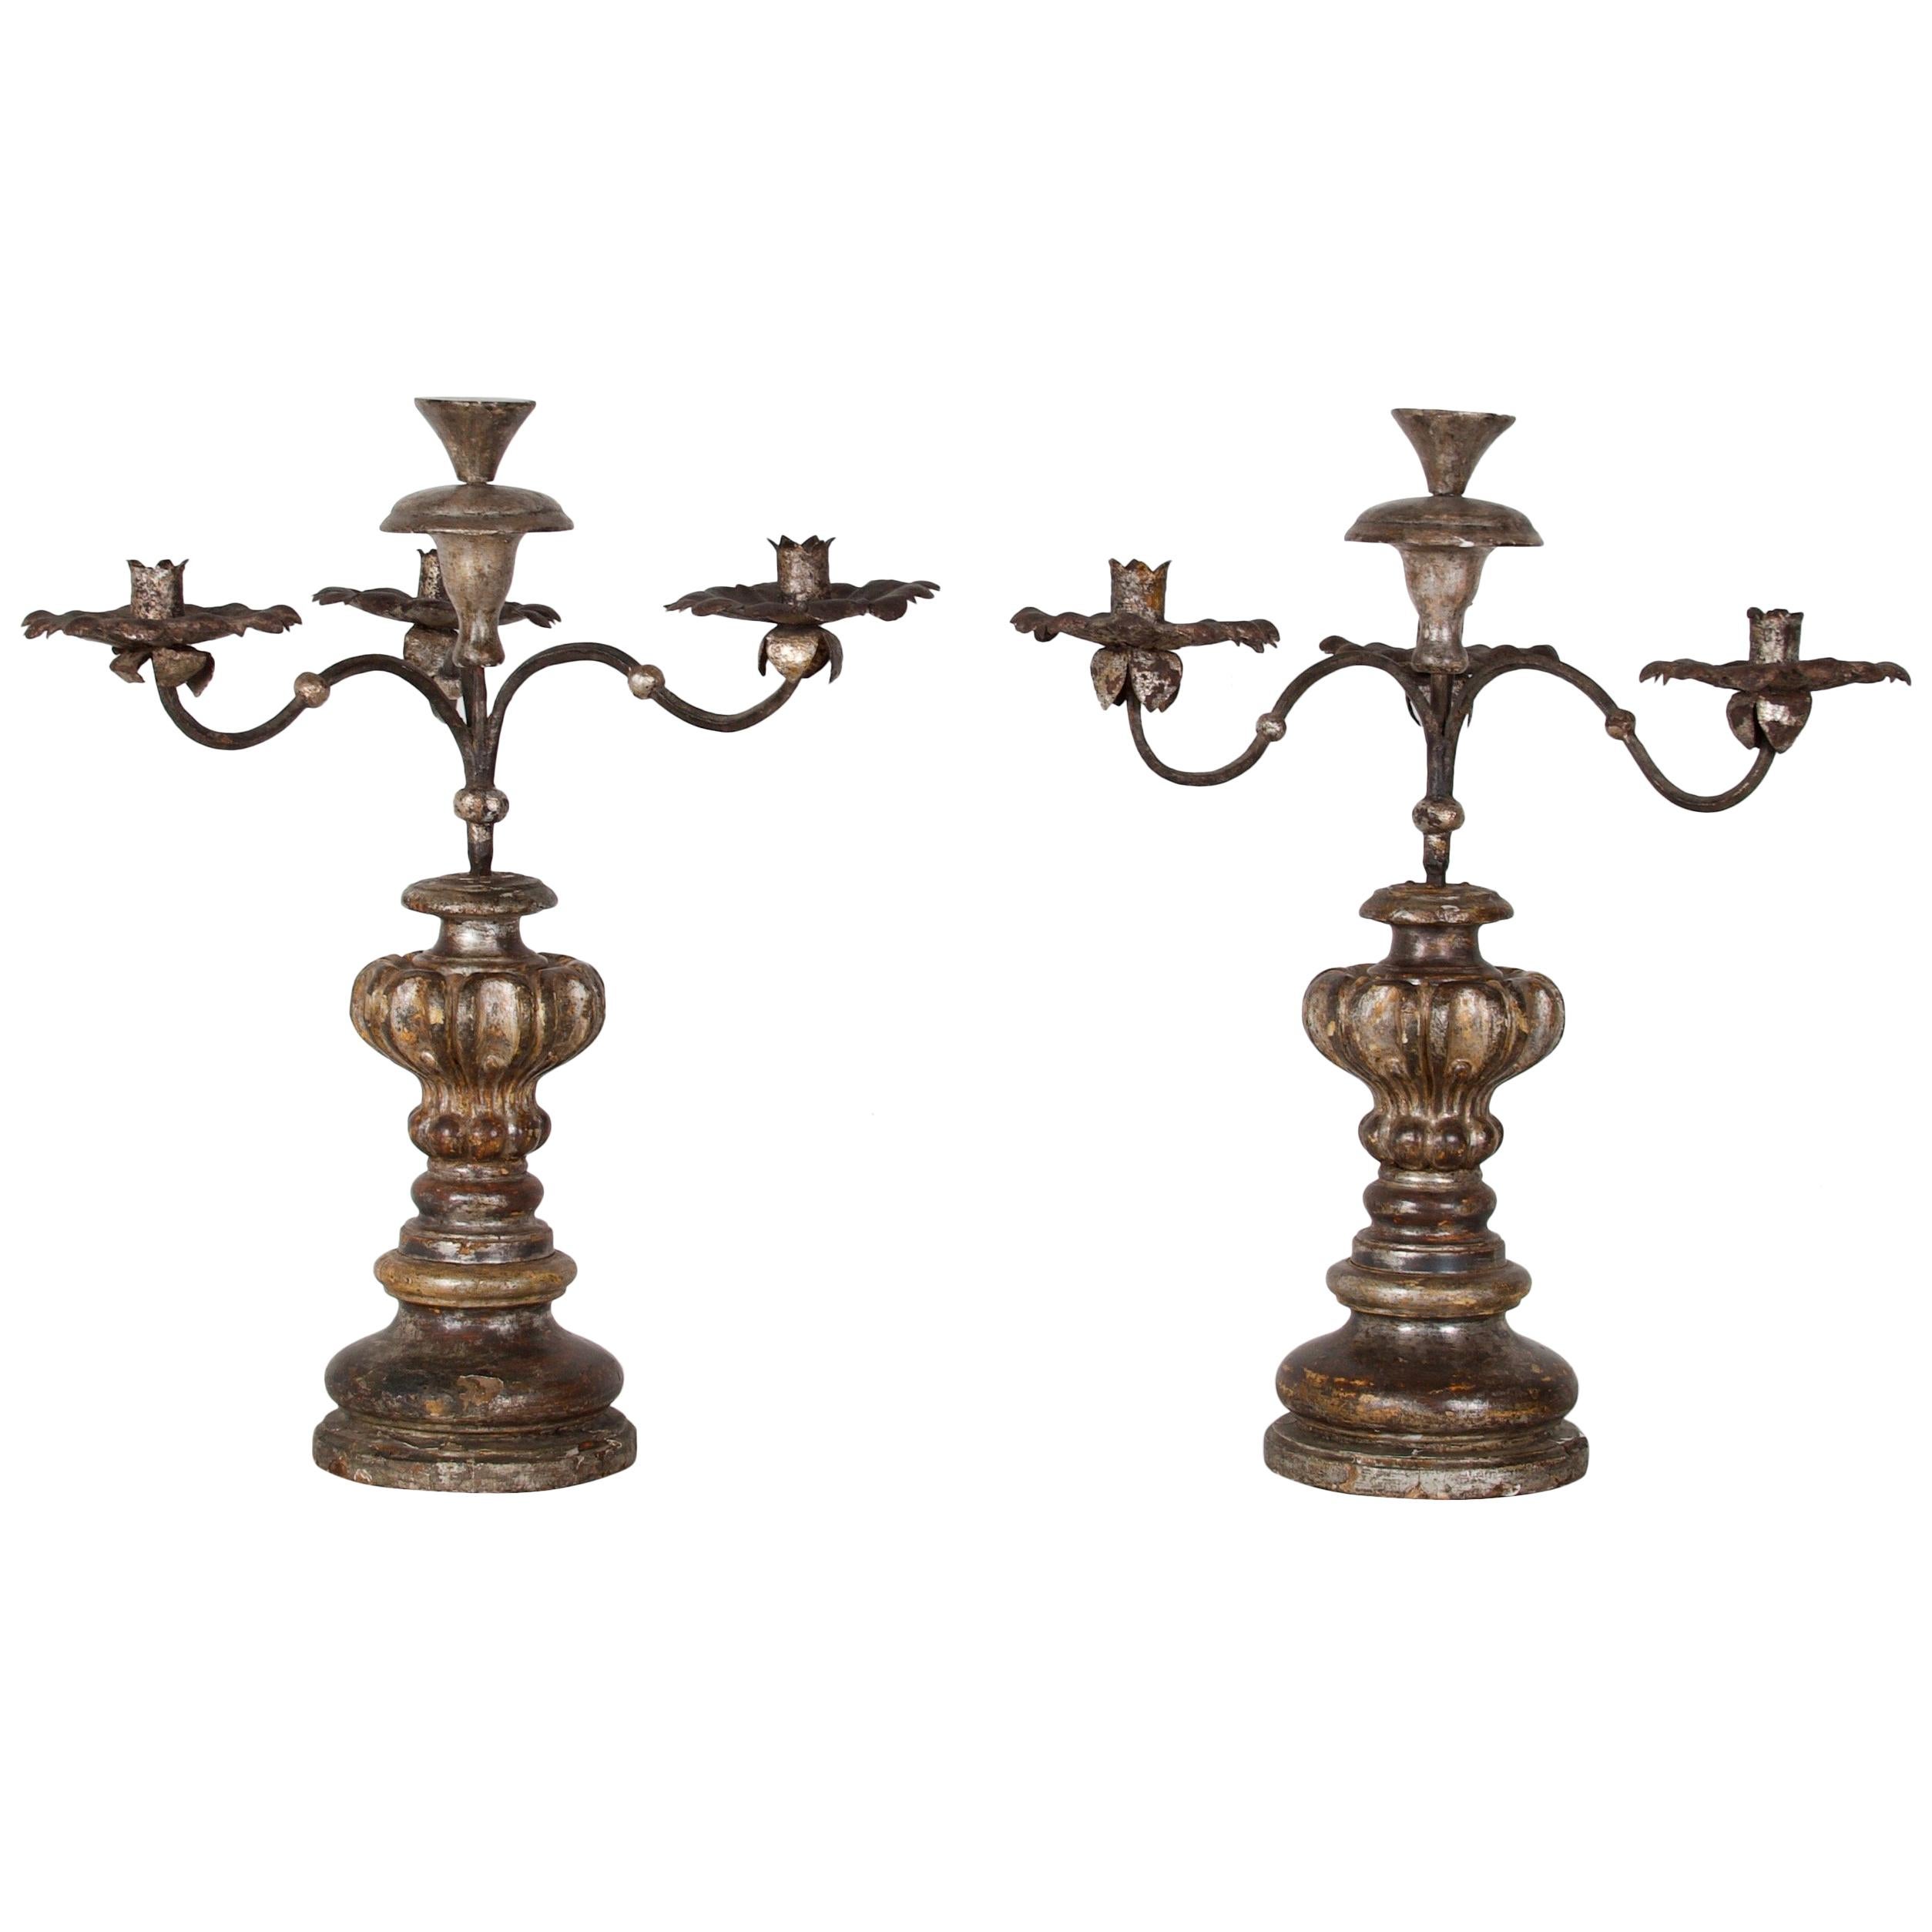 Antique Candlesticks/ Torchere's, hand carved Wood and forged Iron. Three Candes For Sale